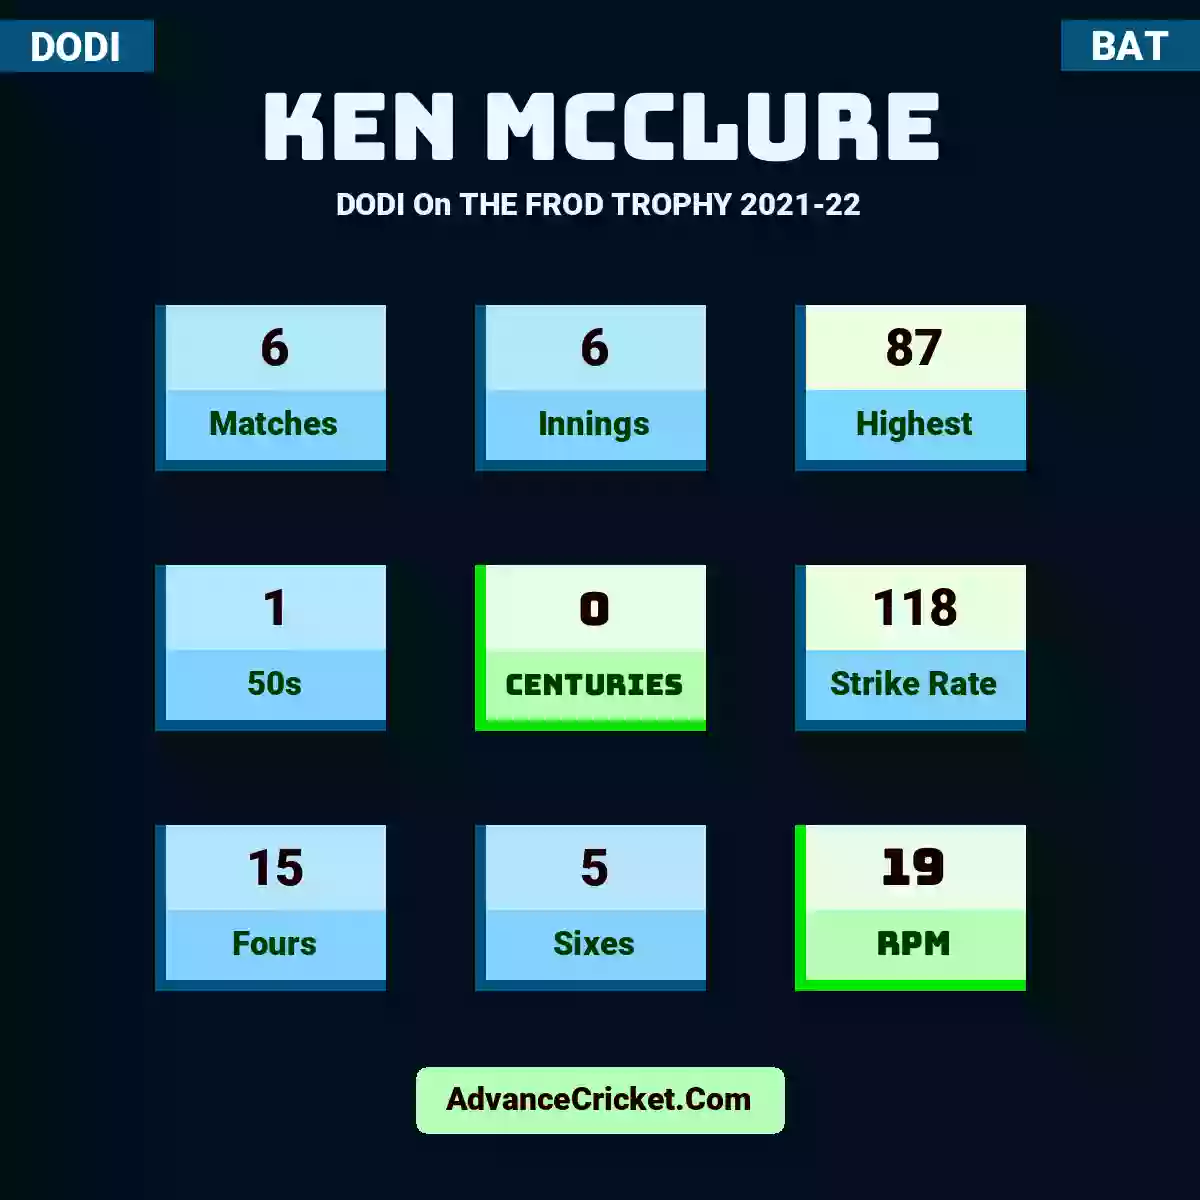 Ken McClure DODI  On THE FROD TROPHY 2021-22, Ken McClure played 6 matches, scored 87 runs as highest, 1 half-centuries, and 0 centuries, with a strike rate of 118. K.McClure hit 15 fours and 5 sixes, with an RPM of 19.